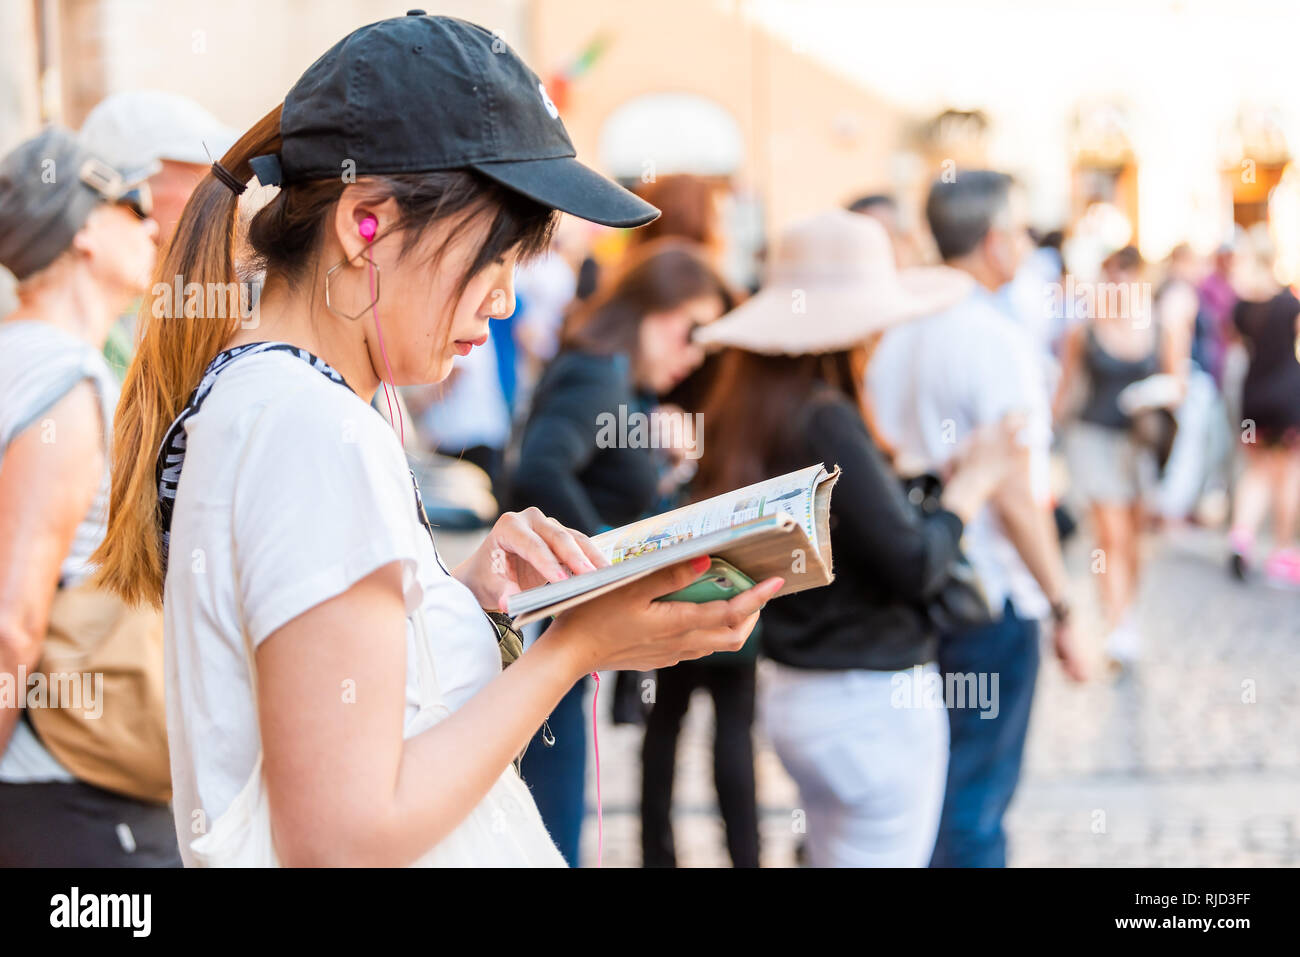 Rome, Italy - September 4, 2018: Closeup profile portrait of young Asian woman on street in historic city by Trevi fountain reading guide book Stock Photo